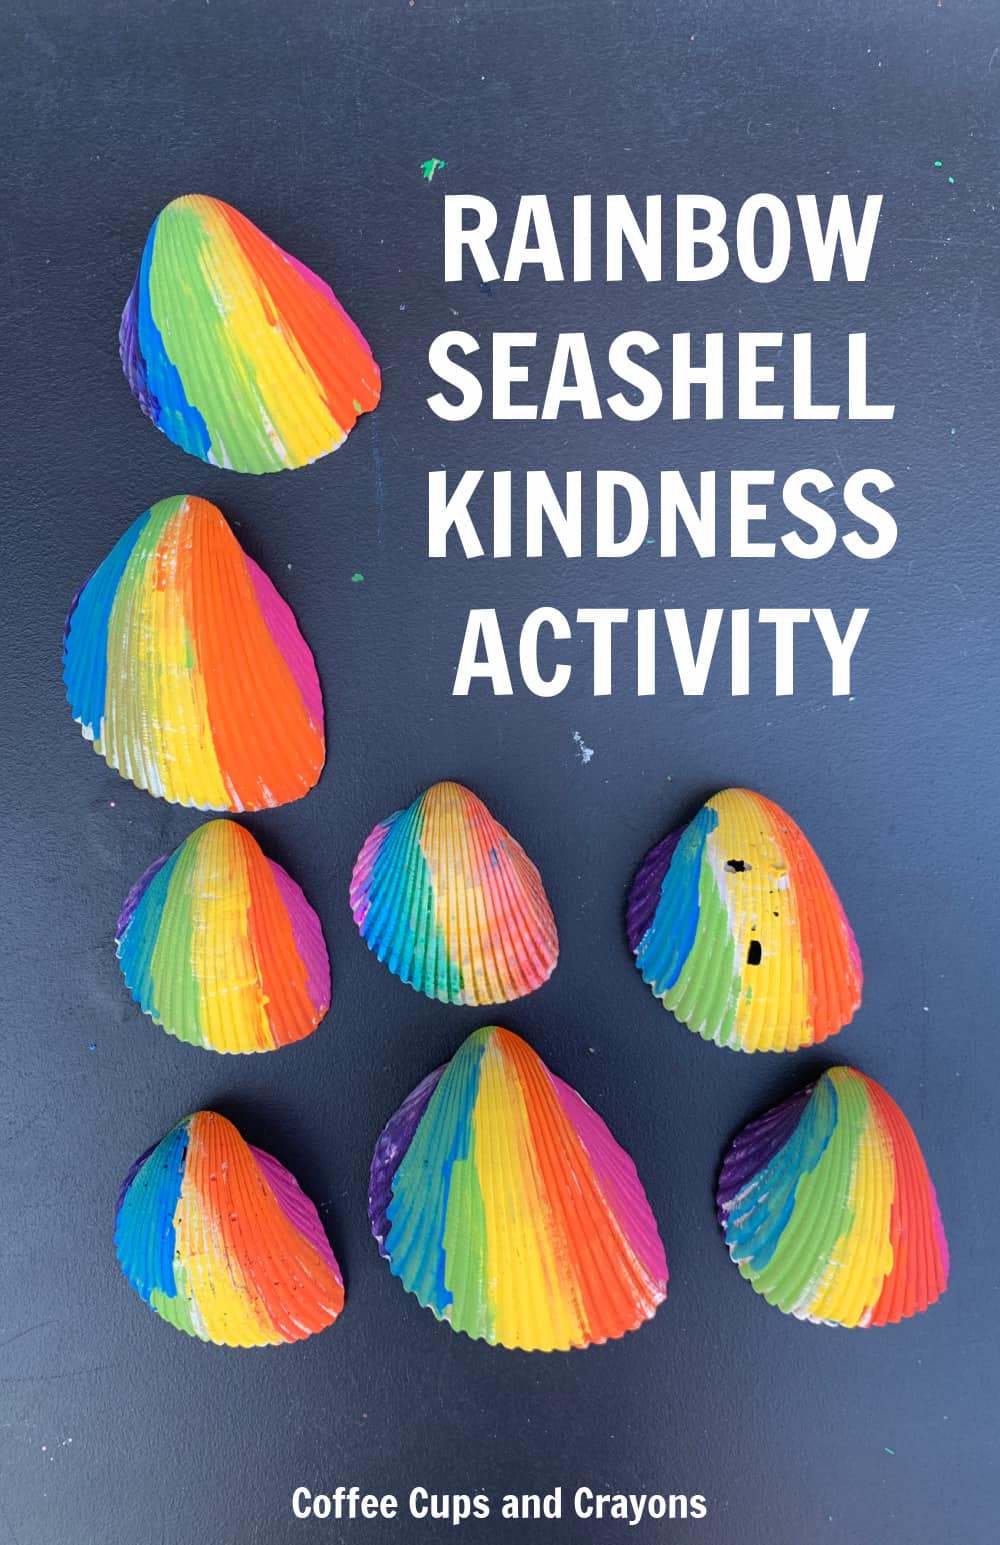 seashells painted in rainbow colors with the text Rainbow Seashell Kindness Activity 